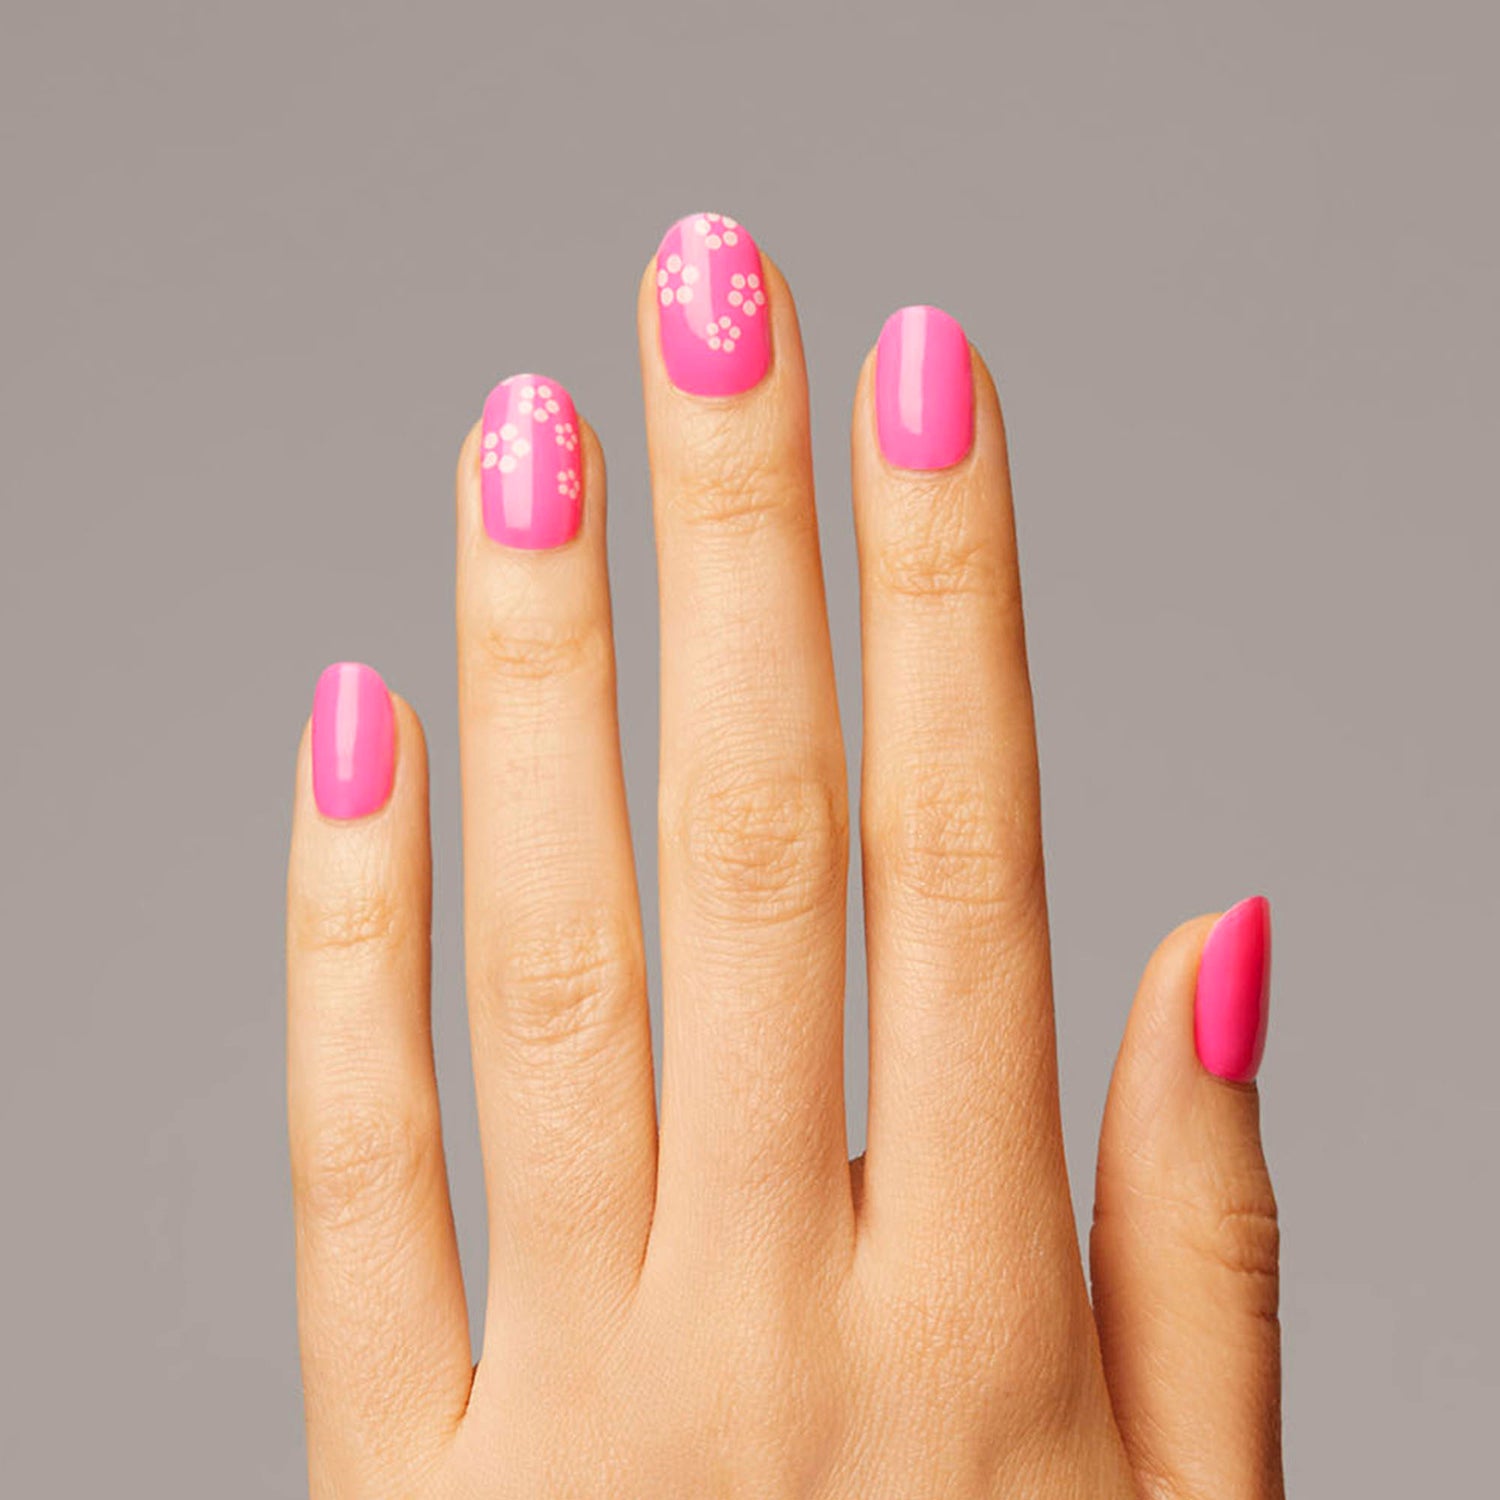 Neon pink gel nail strips featuring pop flower accents with mega volume & maximum shine.